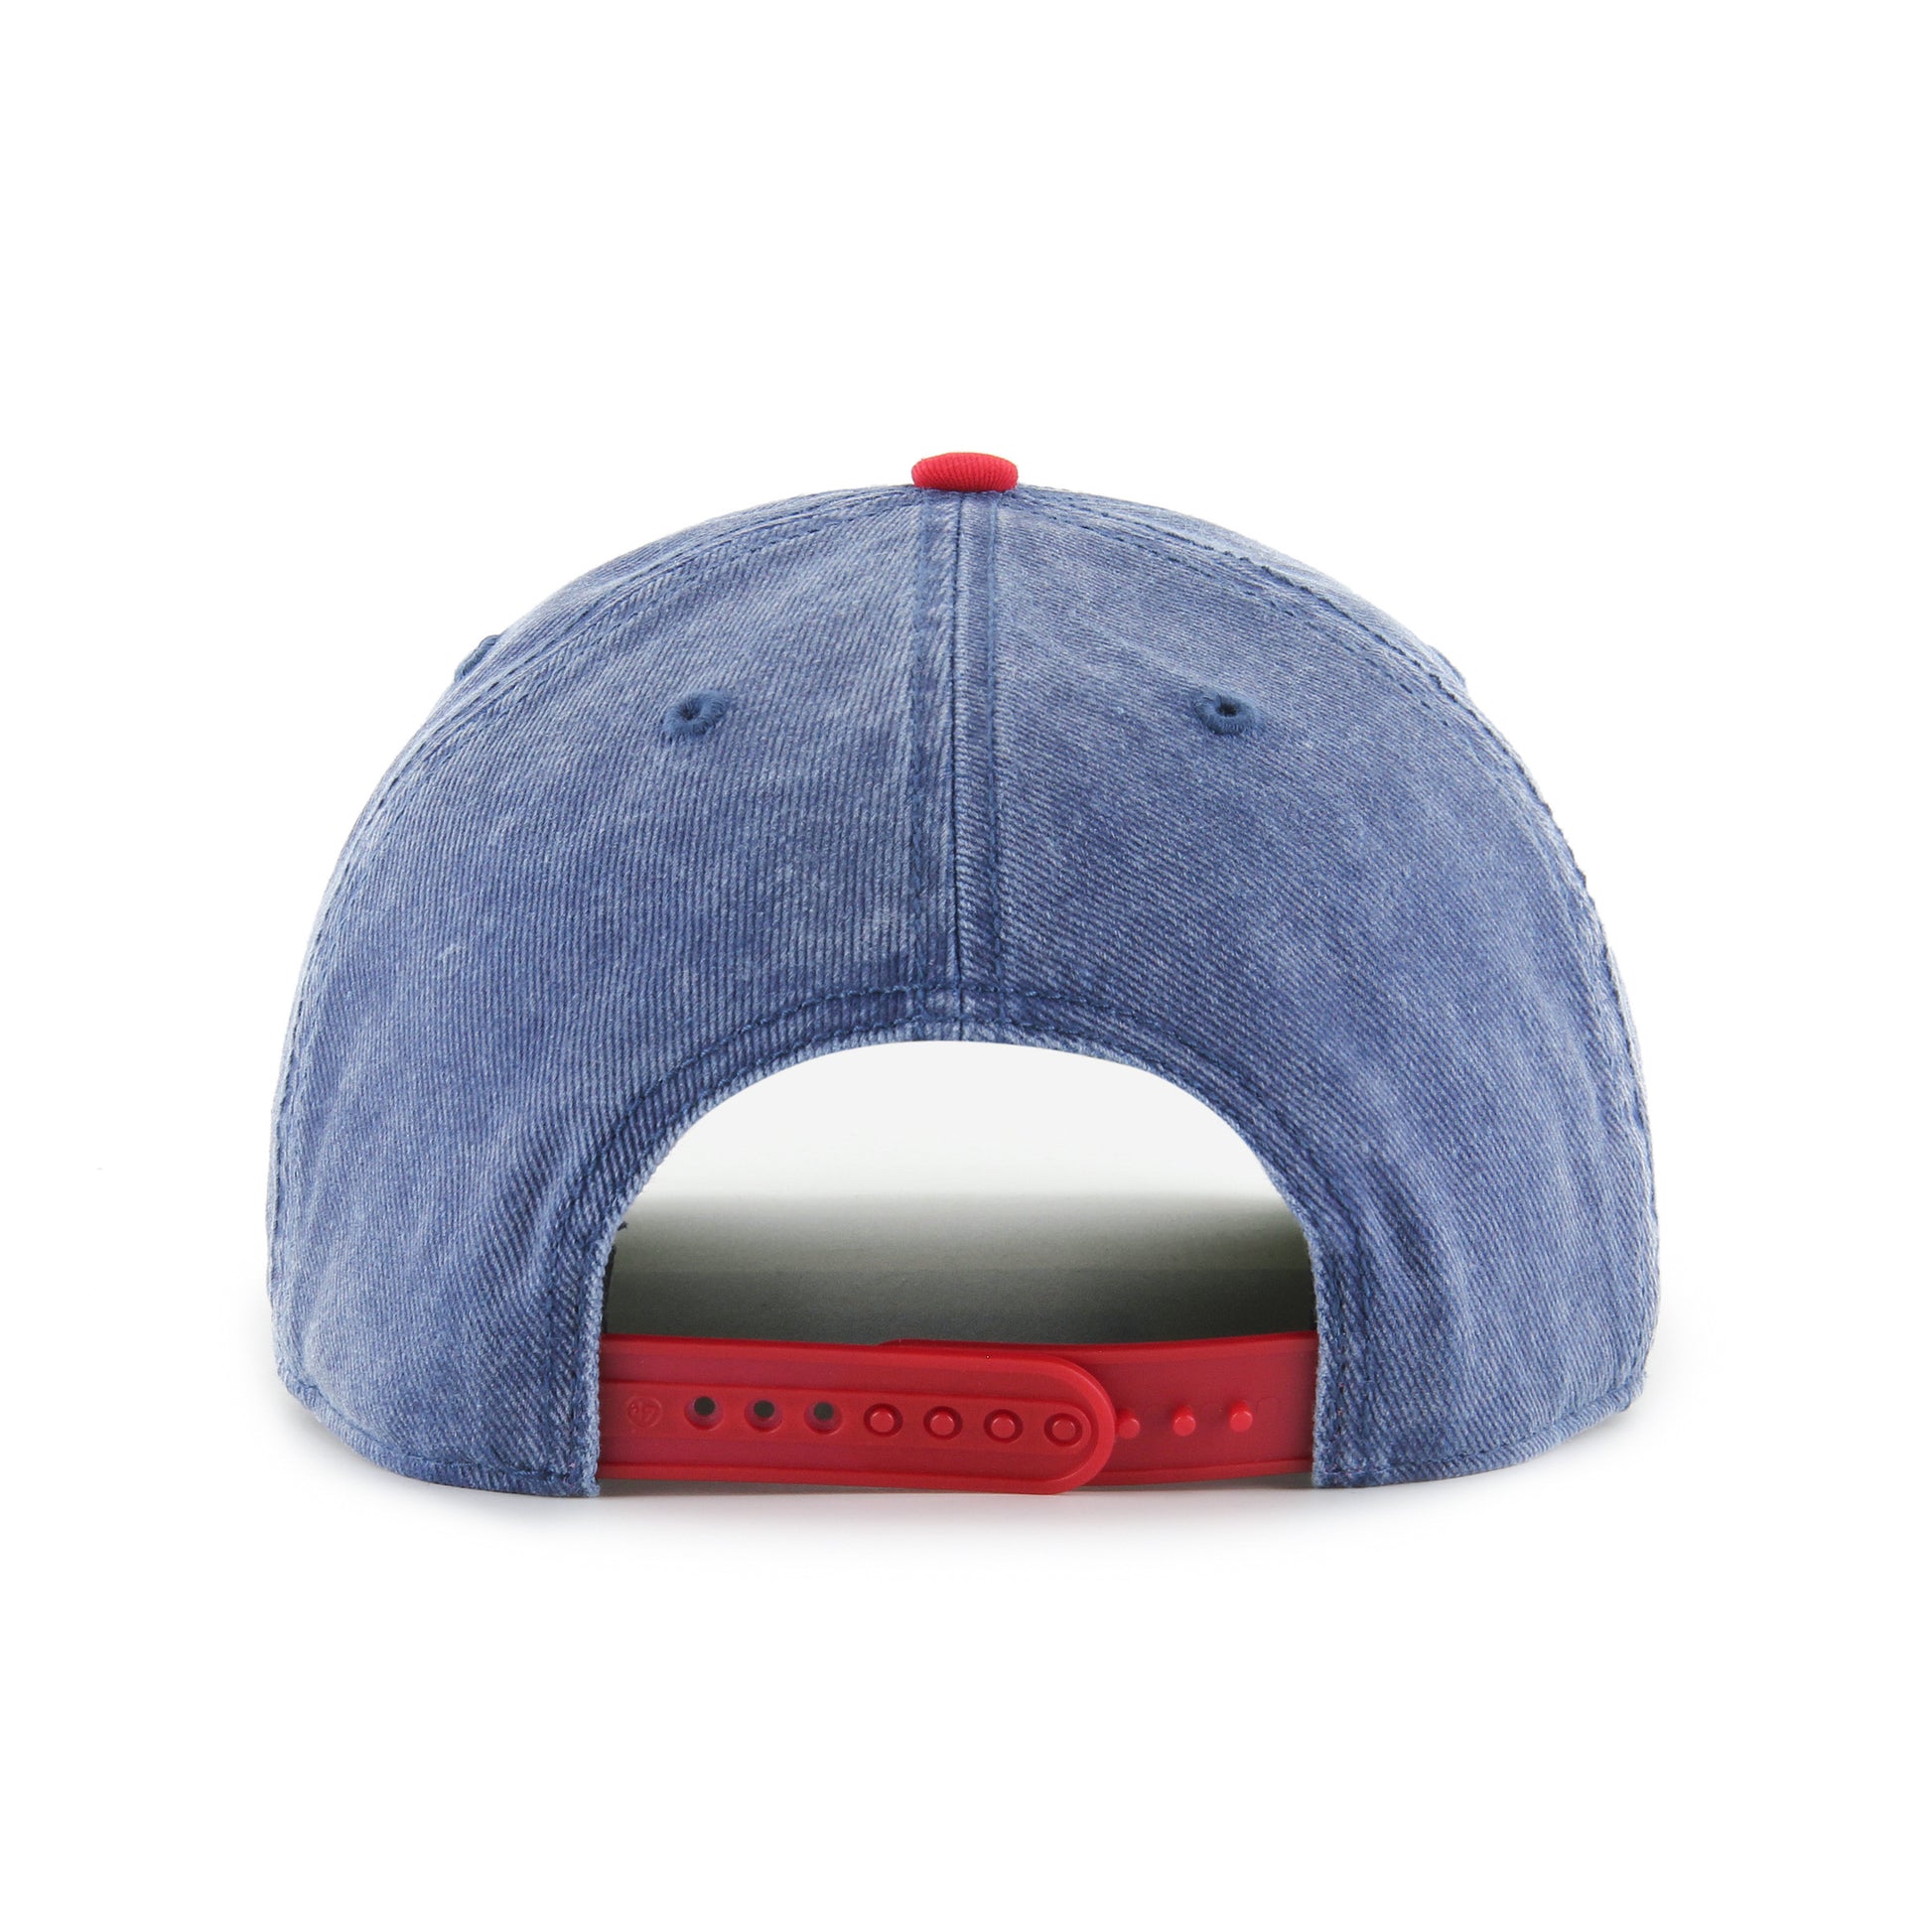 Back: Blue jean snapback with red plastic straps